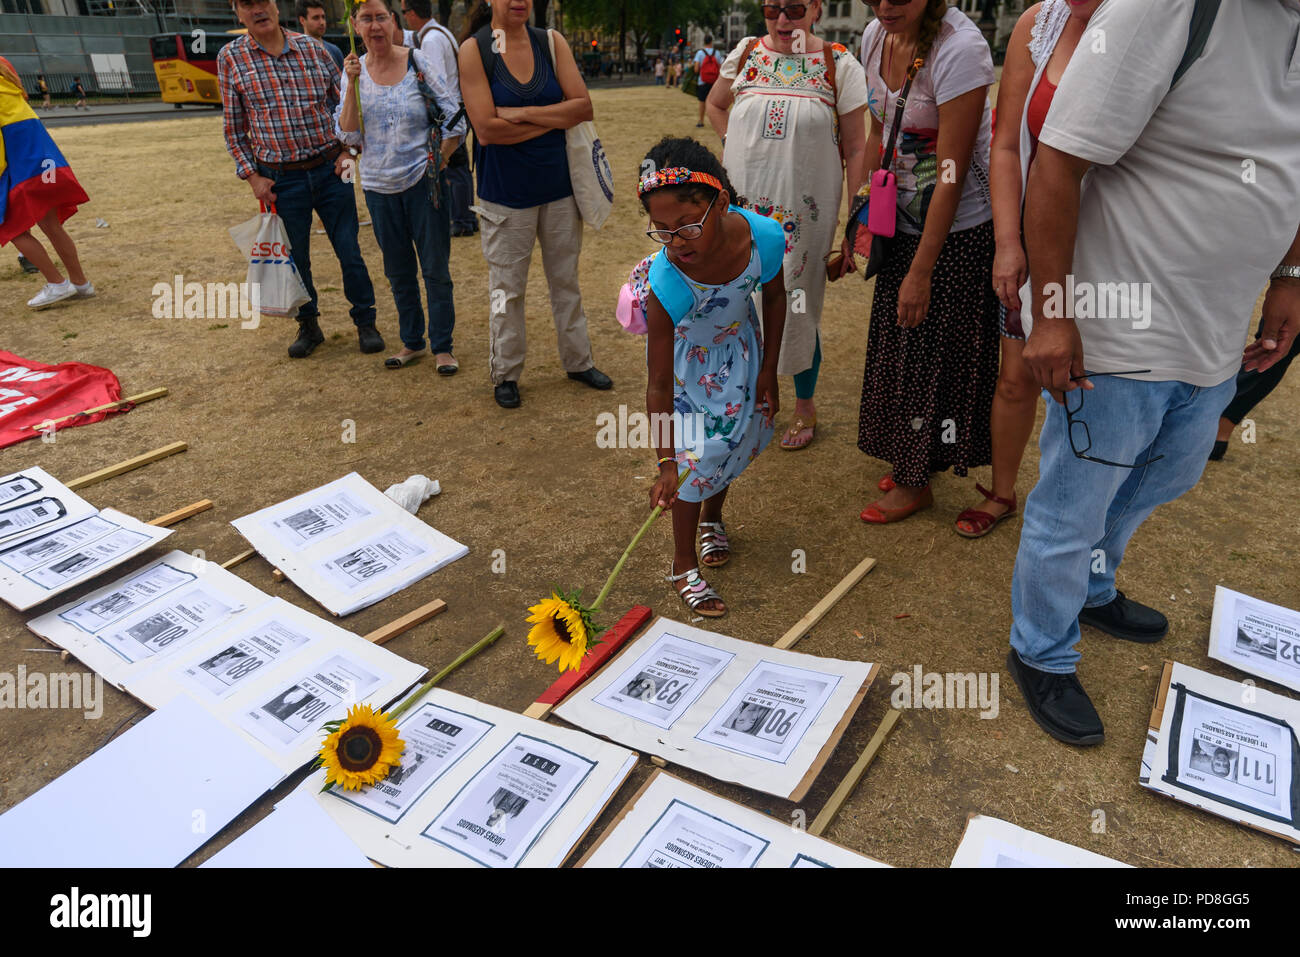 London, UK. 7th August 2018. After the names of the over one hundred murder victims had been read Colombians placed sunflowers on their pictures. The protest in Parliament Square in support of the peace process in Colombia demanded an end to the daily threats and murders throughout the country. The International Mobilization for Life and Peace called on the new President of Colombia to put into action an urgent plan to protect social leaders and rapidly implement the peace agreement. Similar actions took place today at the UN in New York, the International Court of Justice in The Hague, and in Stock Photo